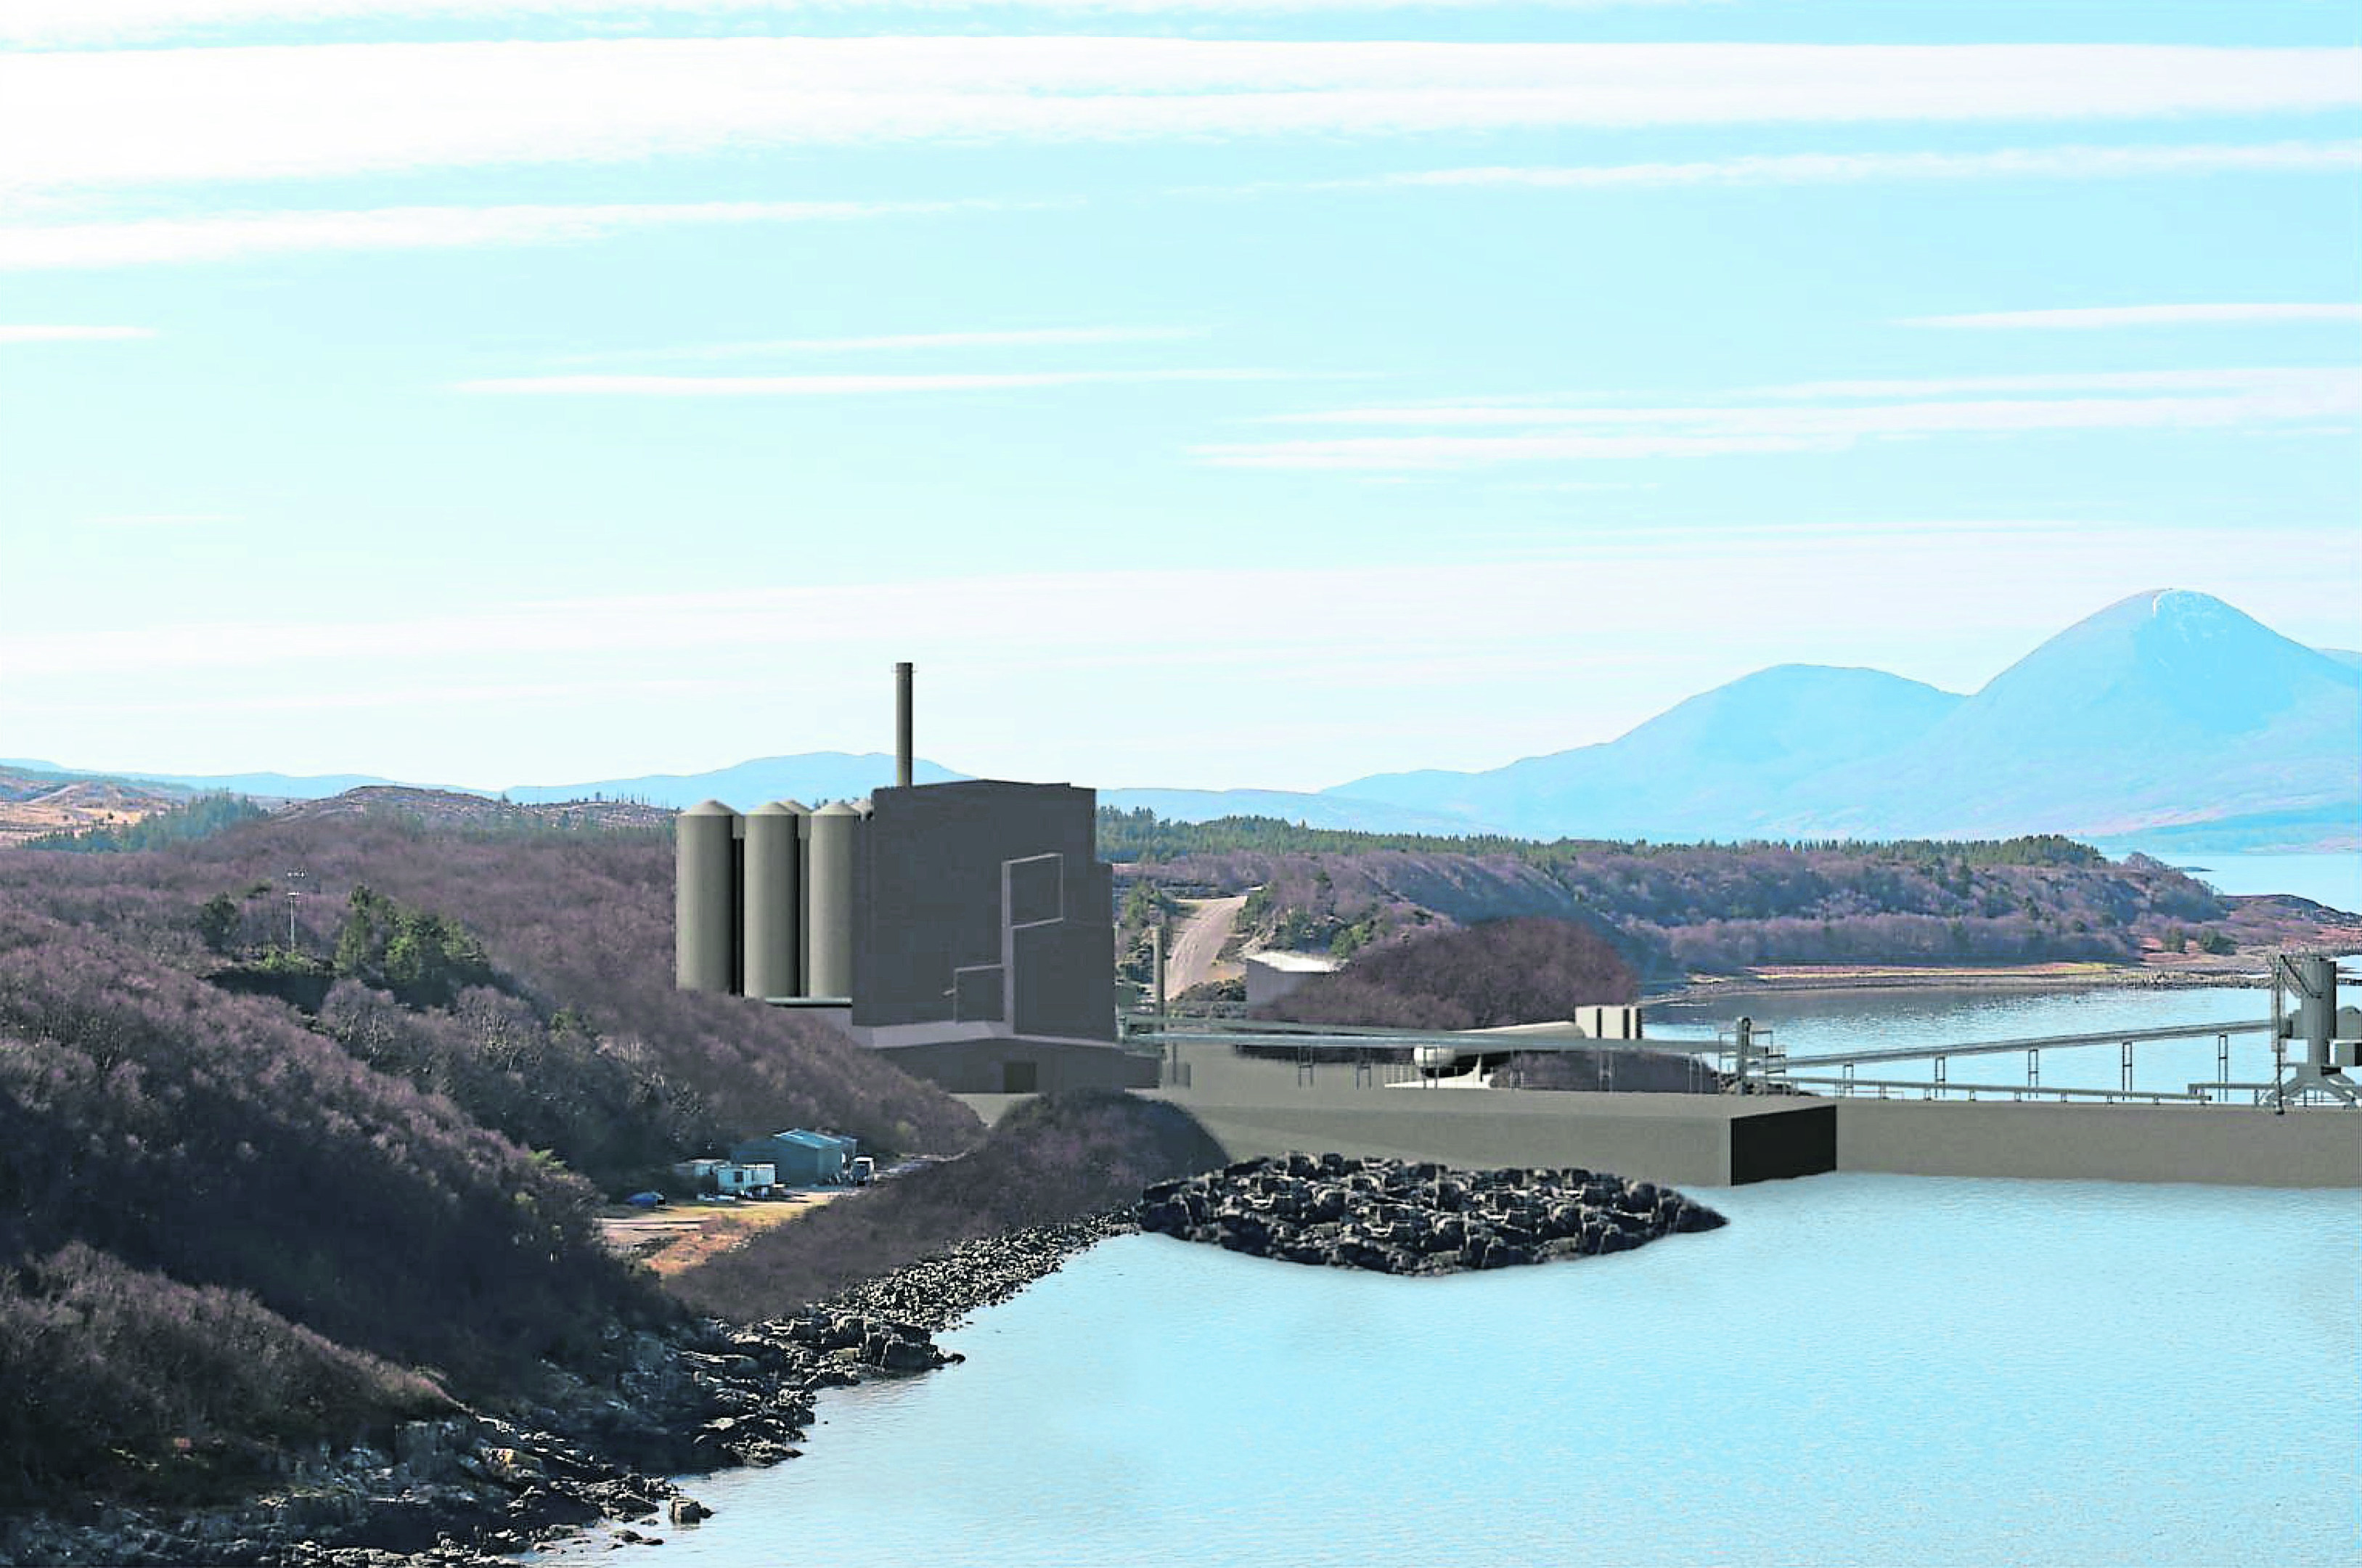 Plans for a new Marine Harvest Fish feed plant at Kyleakin



Impression showing what the plant would look like from Skye Bridge